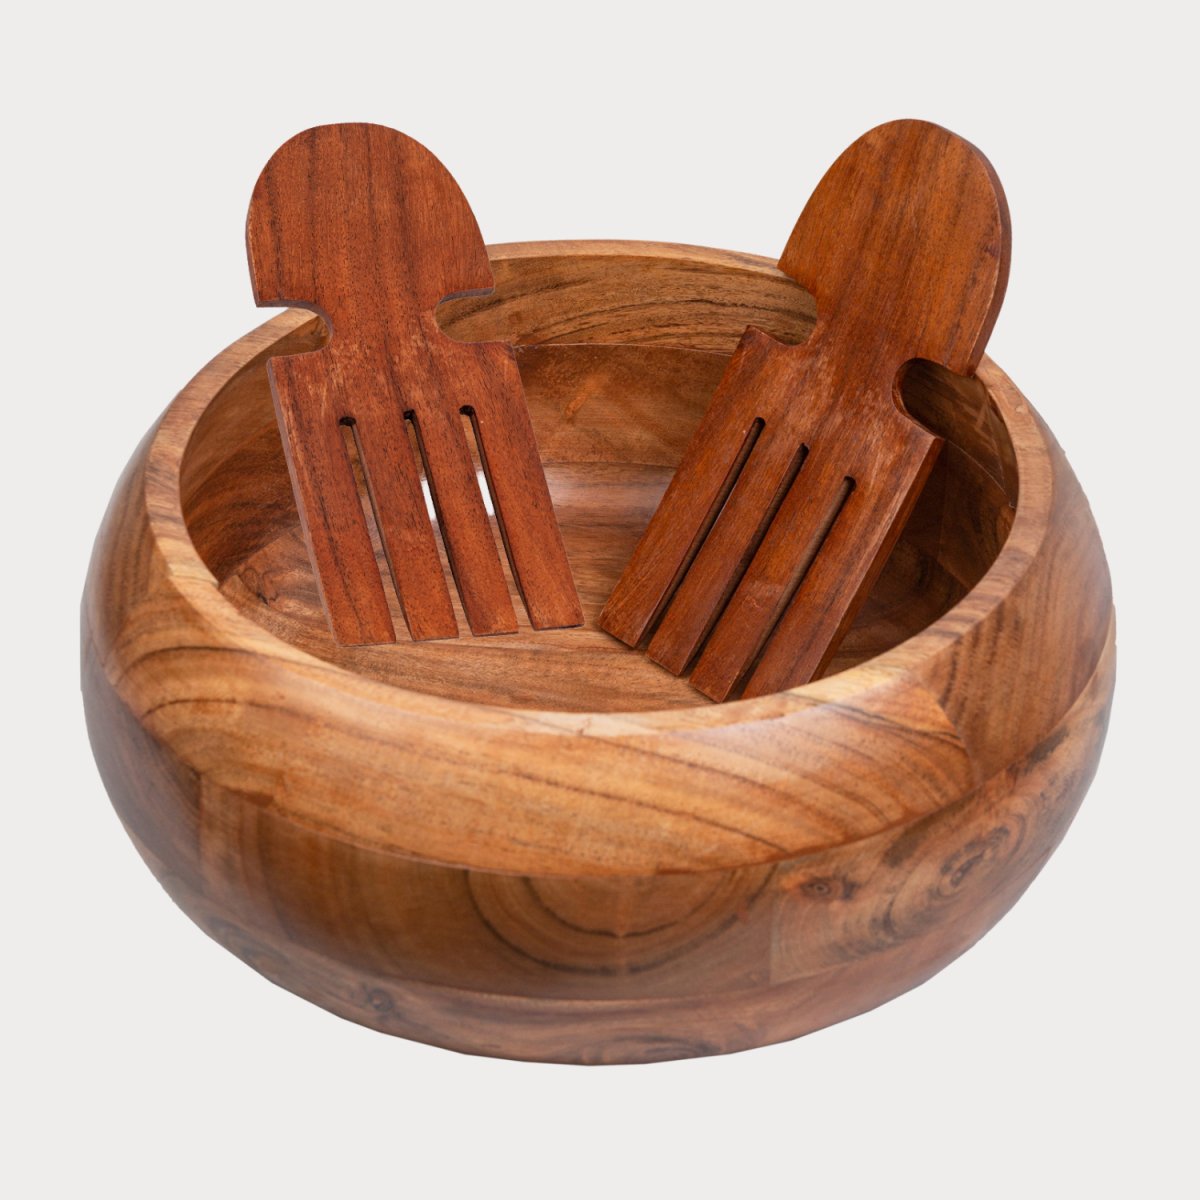 BJ's Wholesale's Large Acacia Wood Serving Bowl Set Is Selling